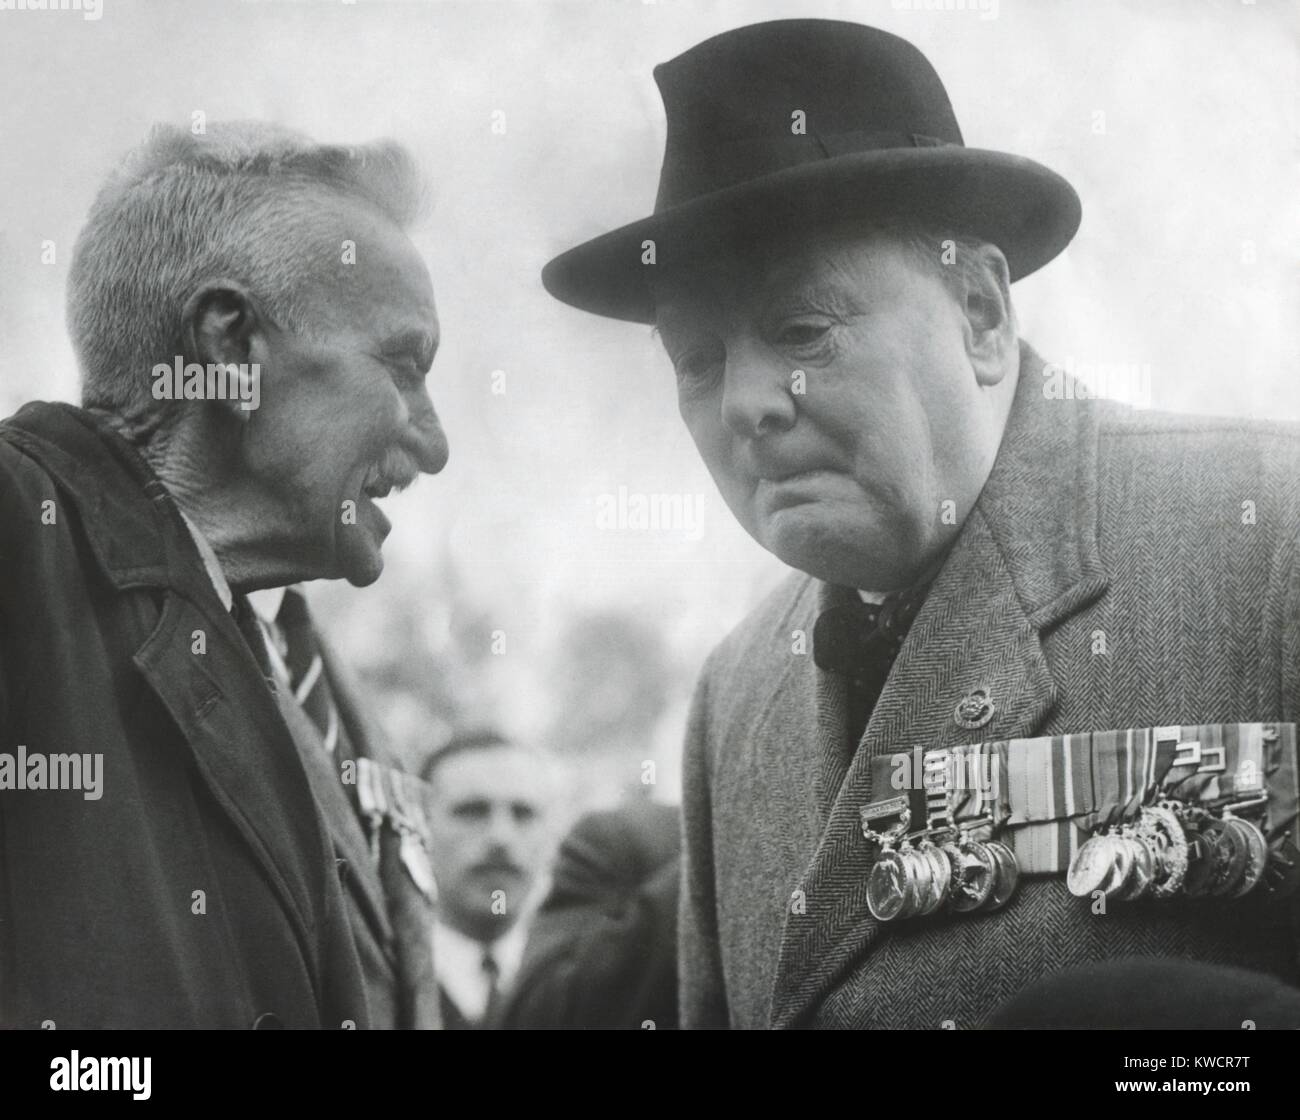 Winston Churchill, wearing his military medals, listening to an elderly man. Ca. 1945 - (BSLOC 2014 17 46) Stock Photo